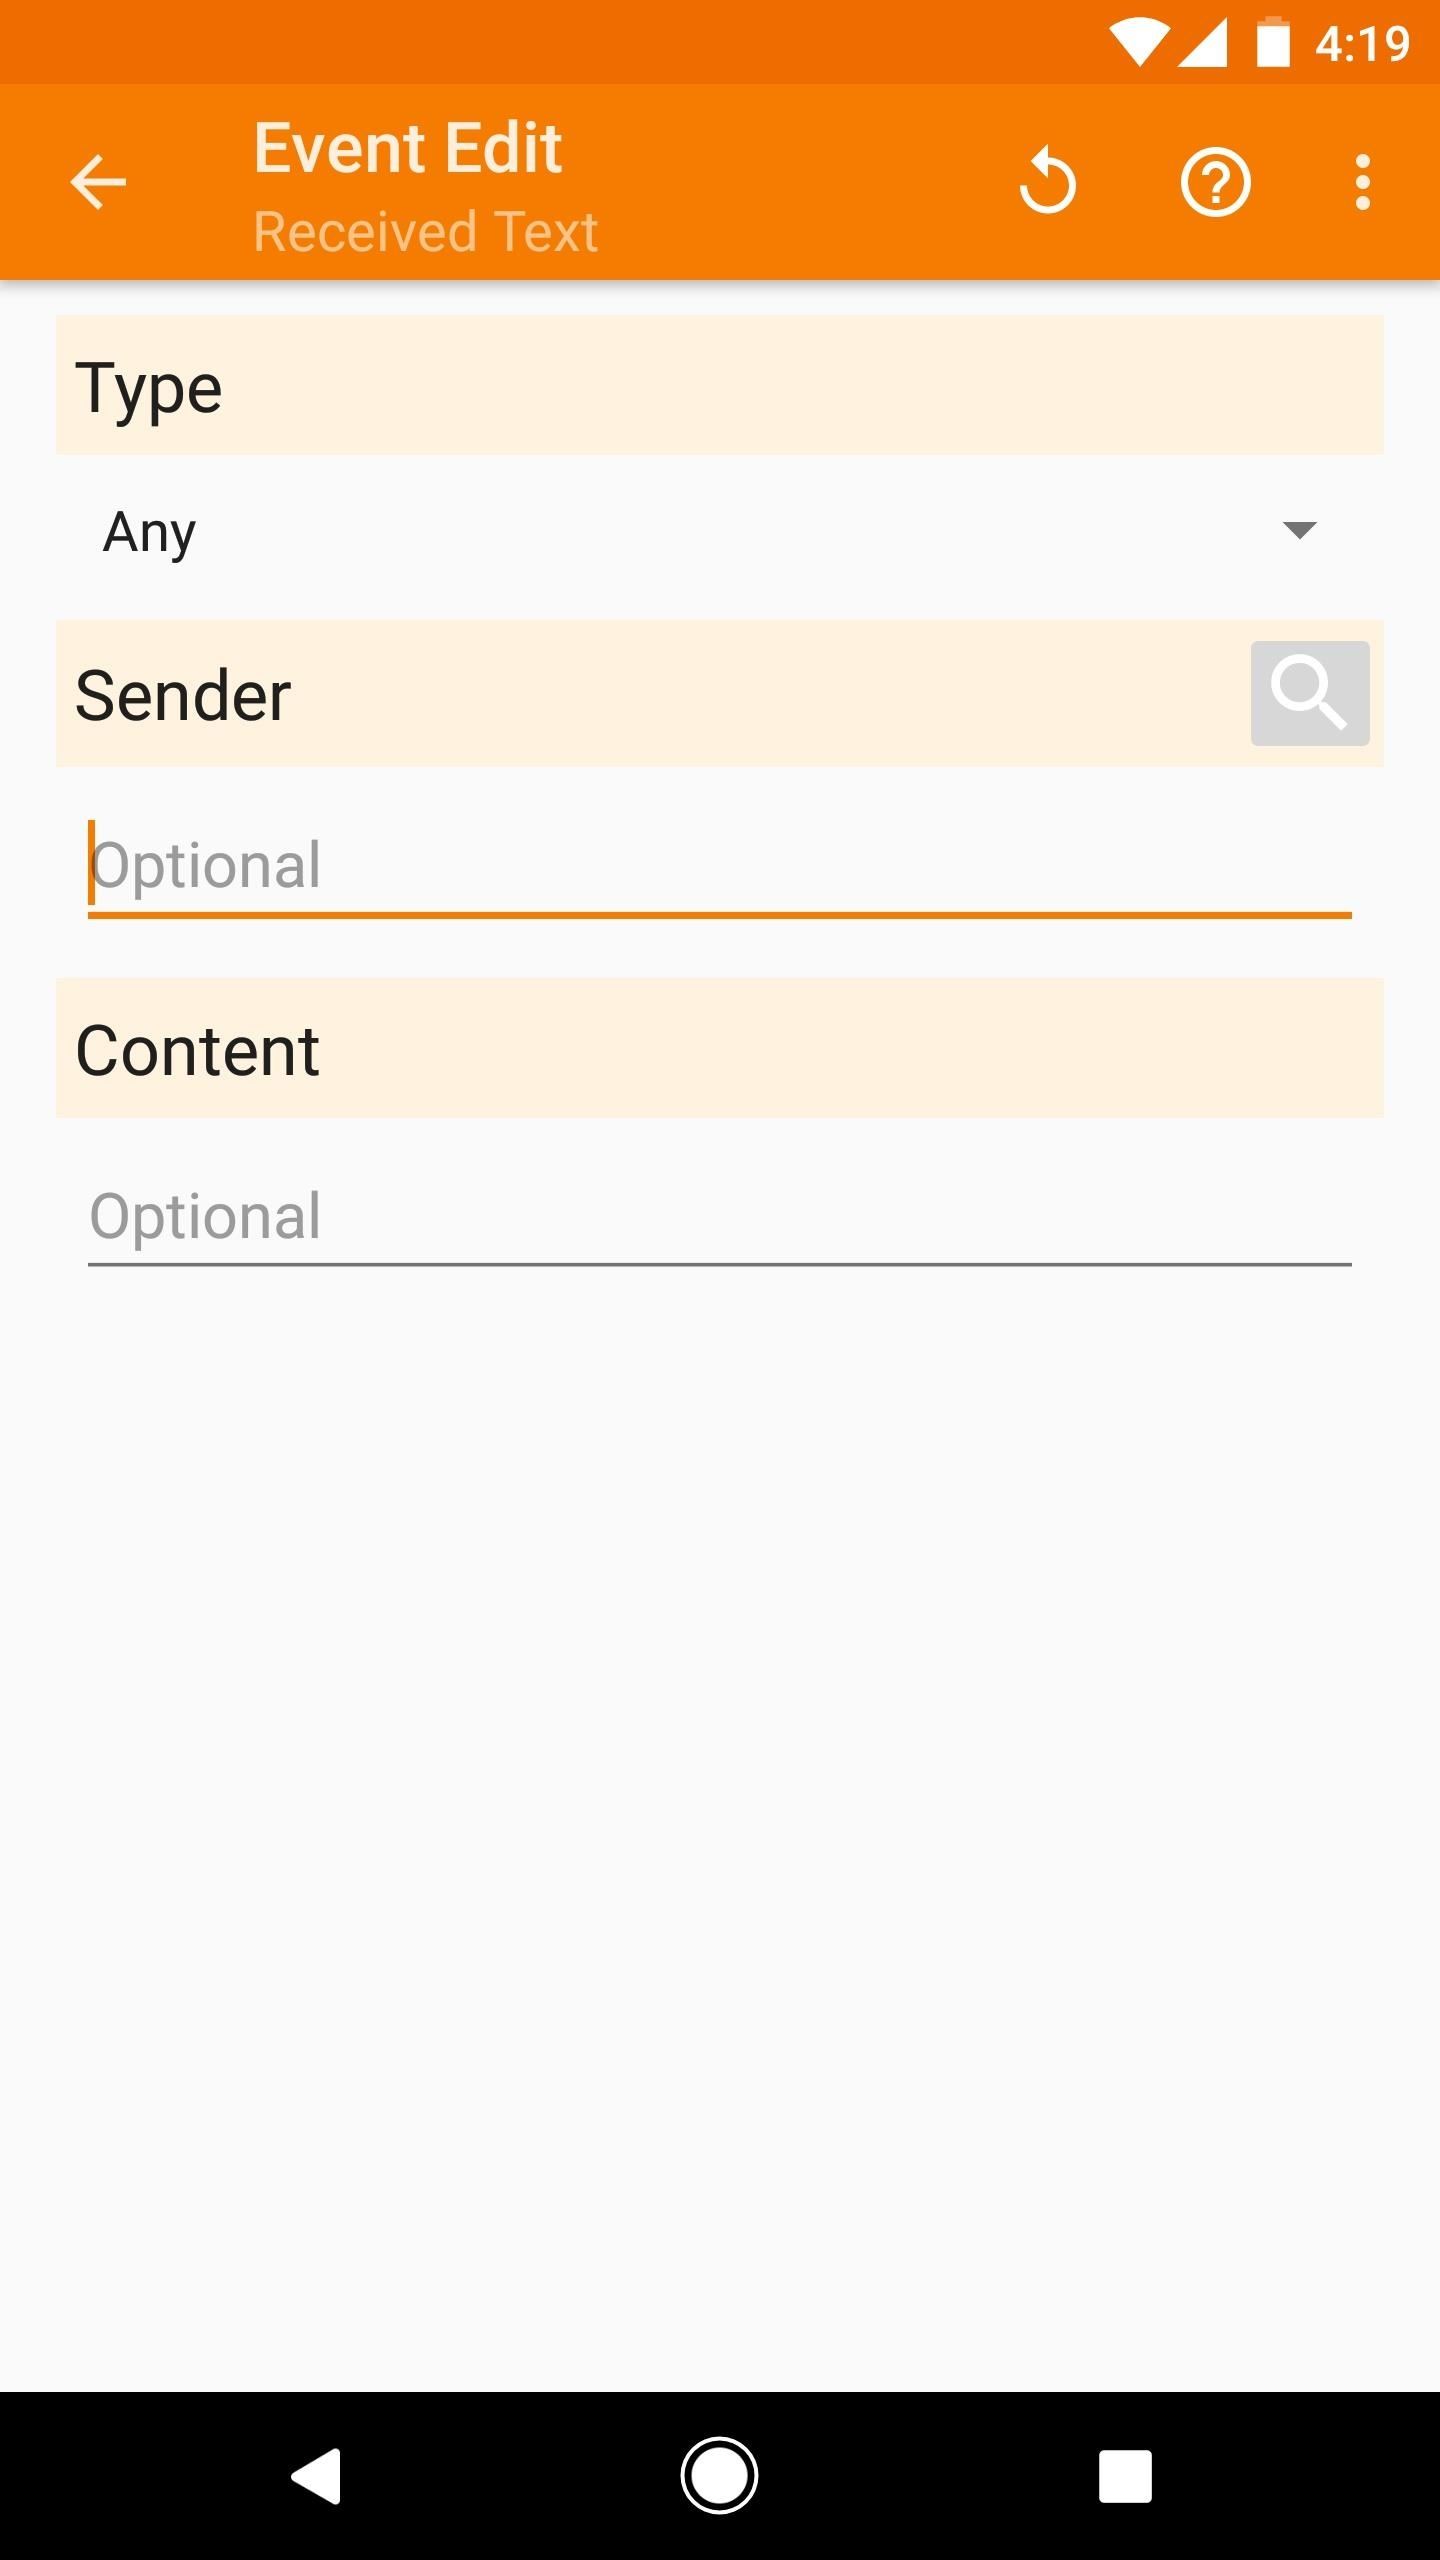 Everything You Need to Know About Tasker Profiles